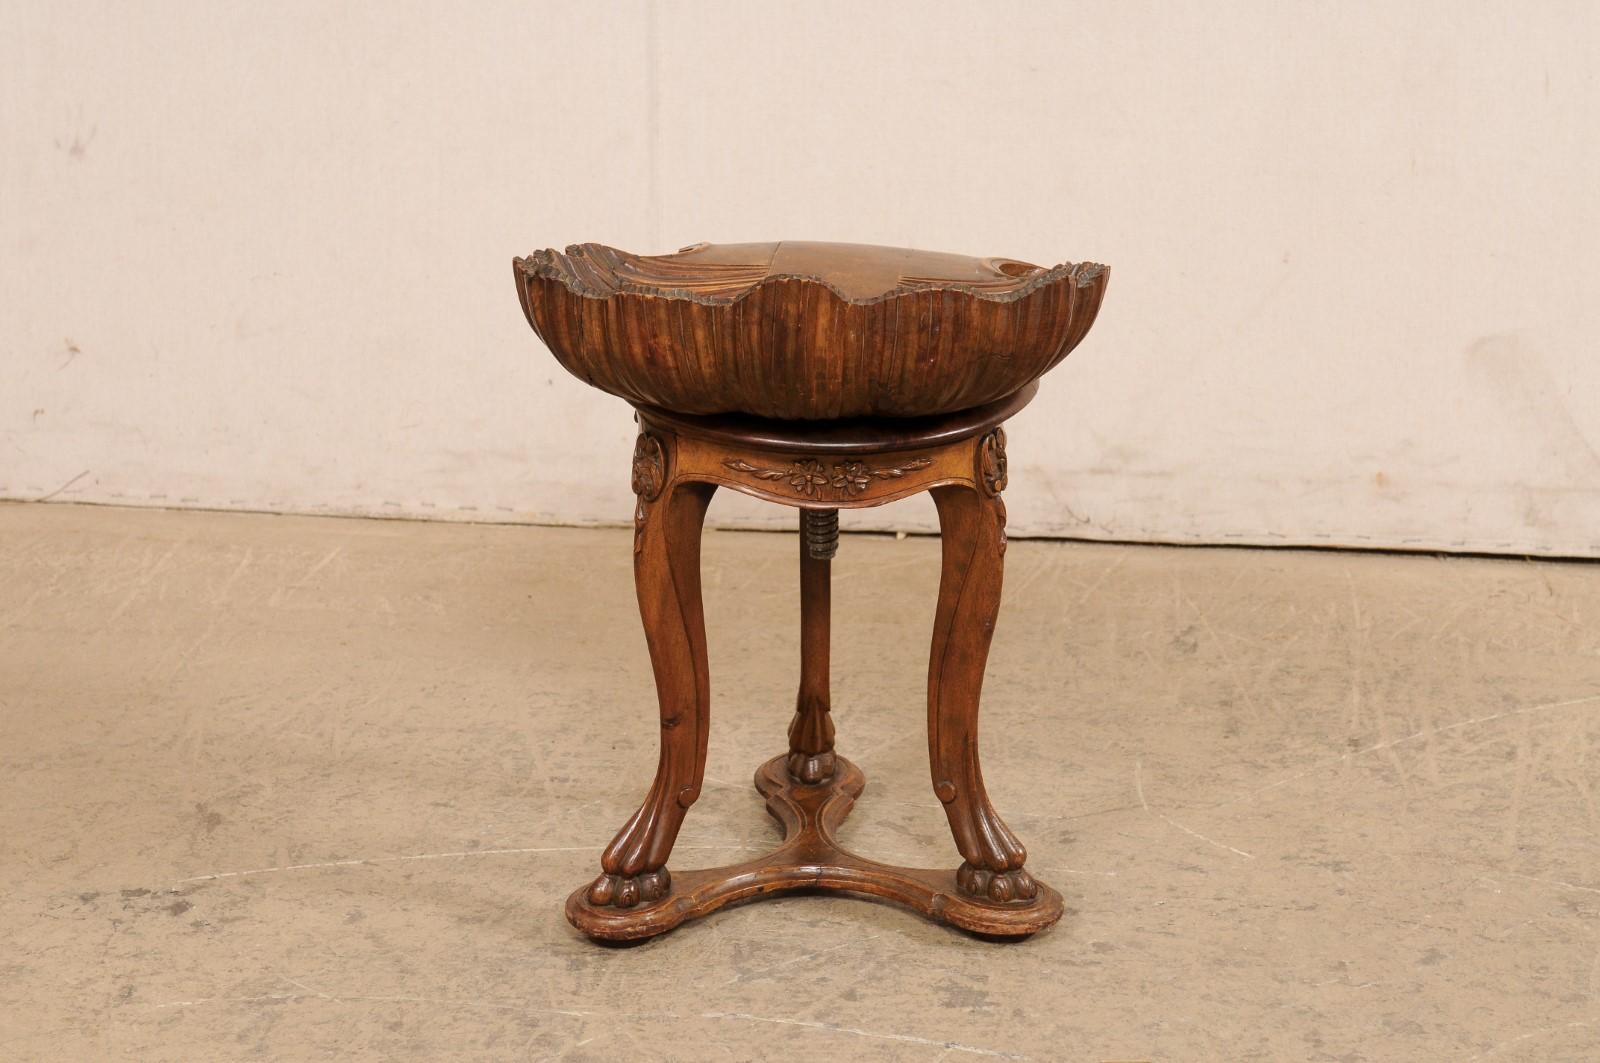 Italian Antique Wooden Grotto Stool w/Carved-Shell Seat For Sale 2